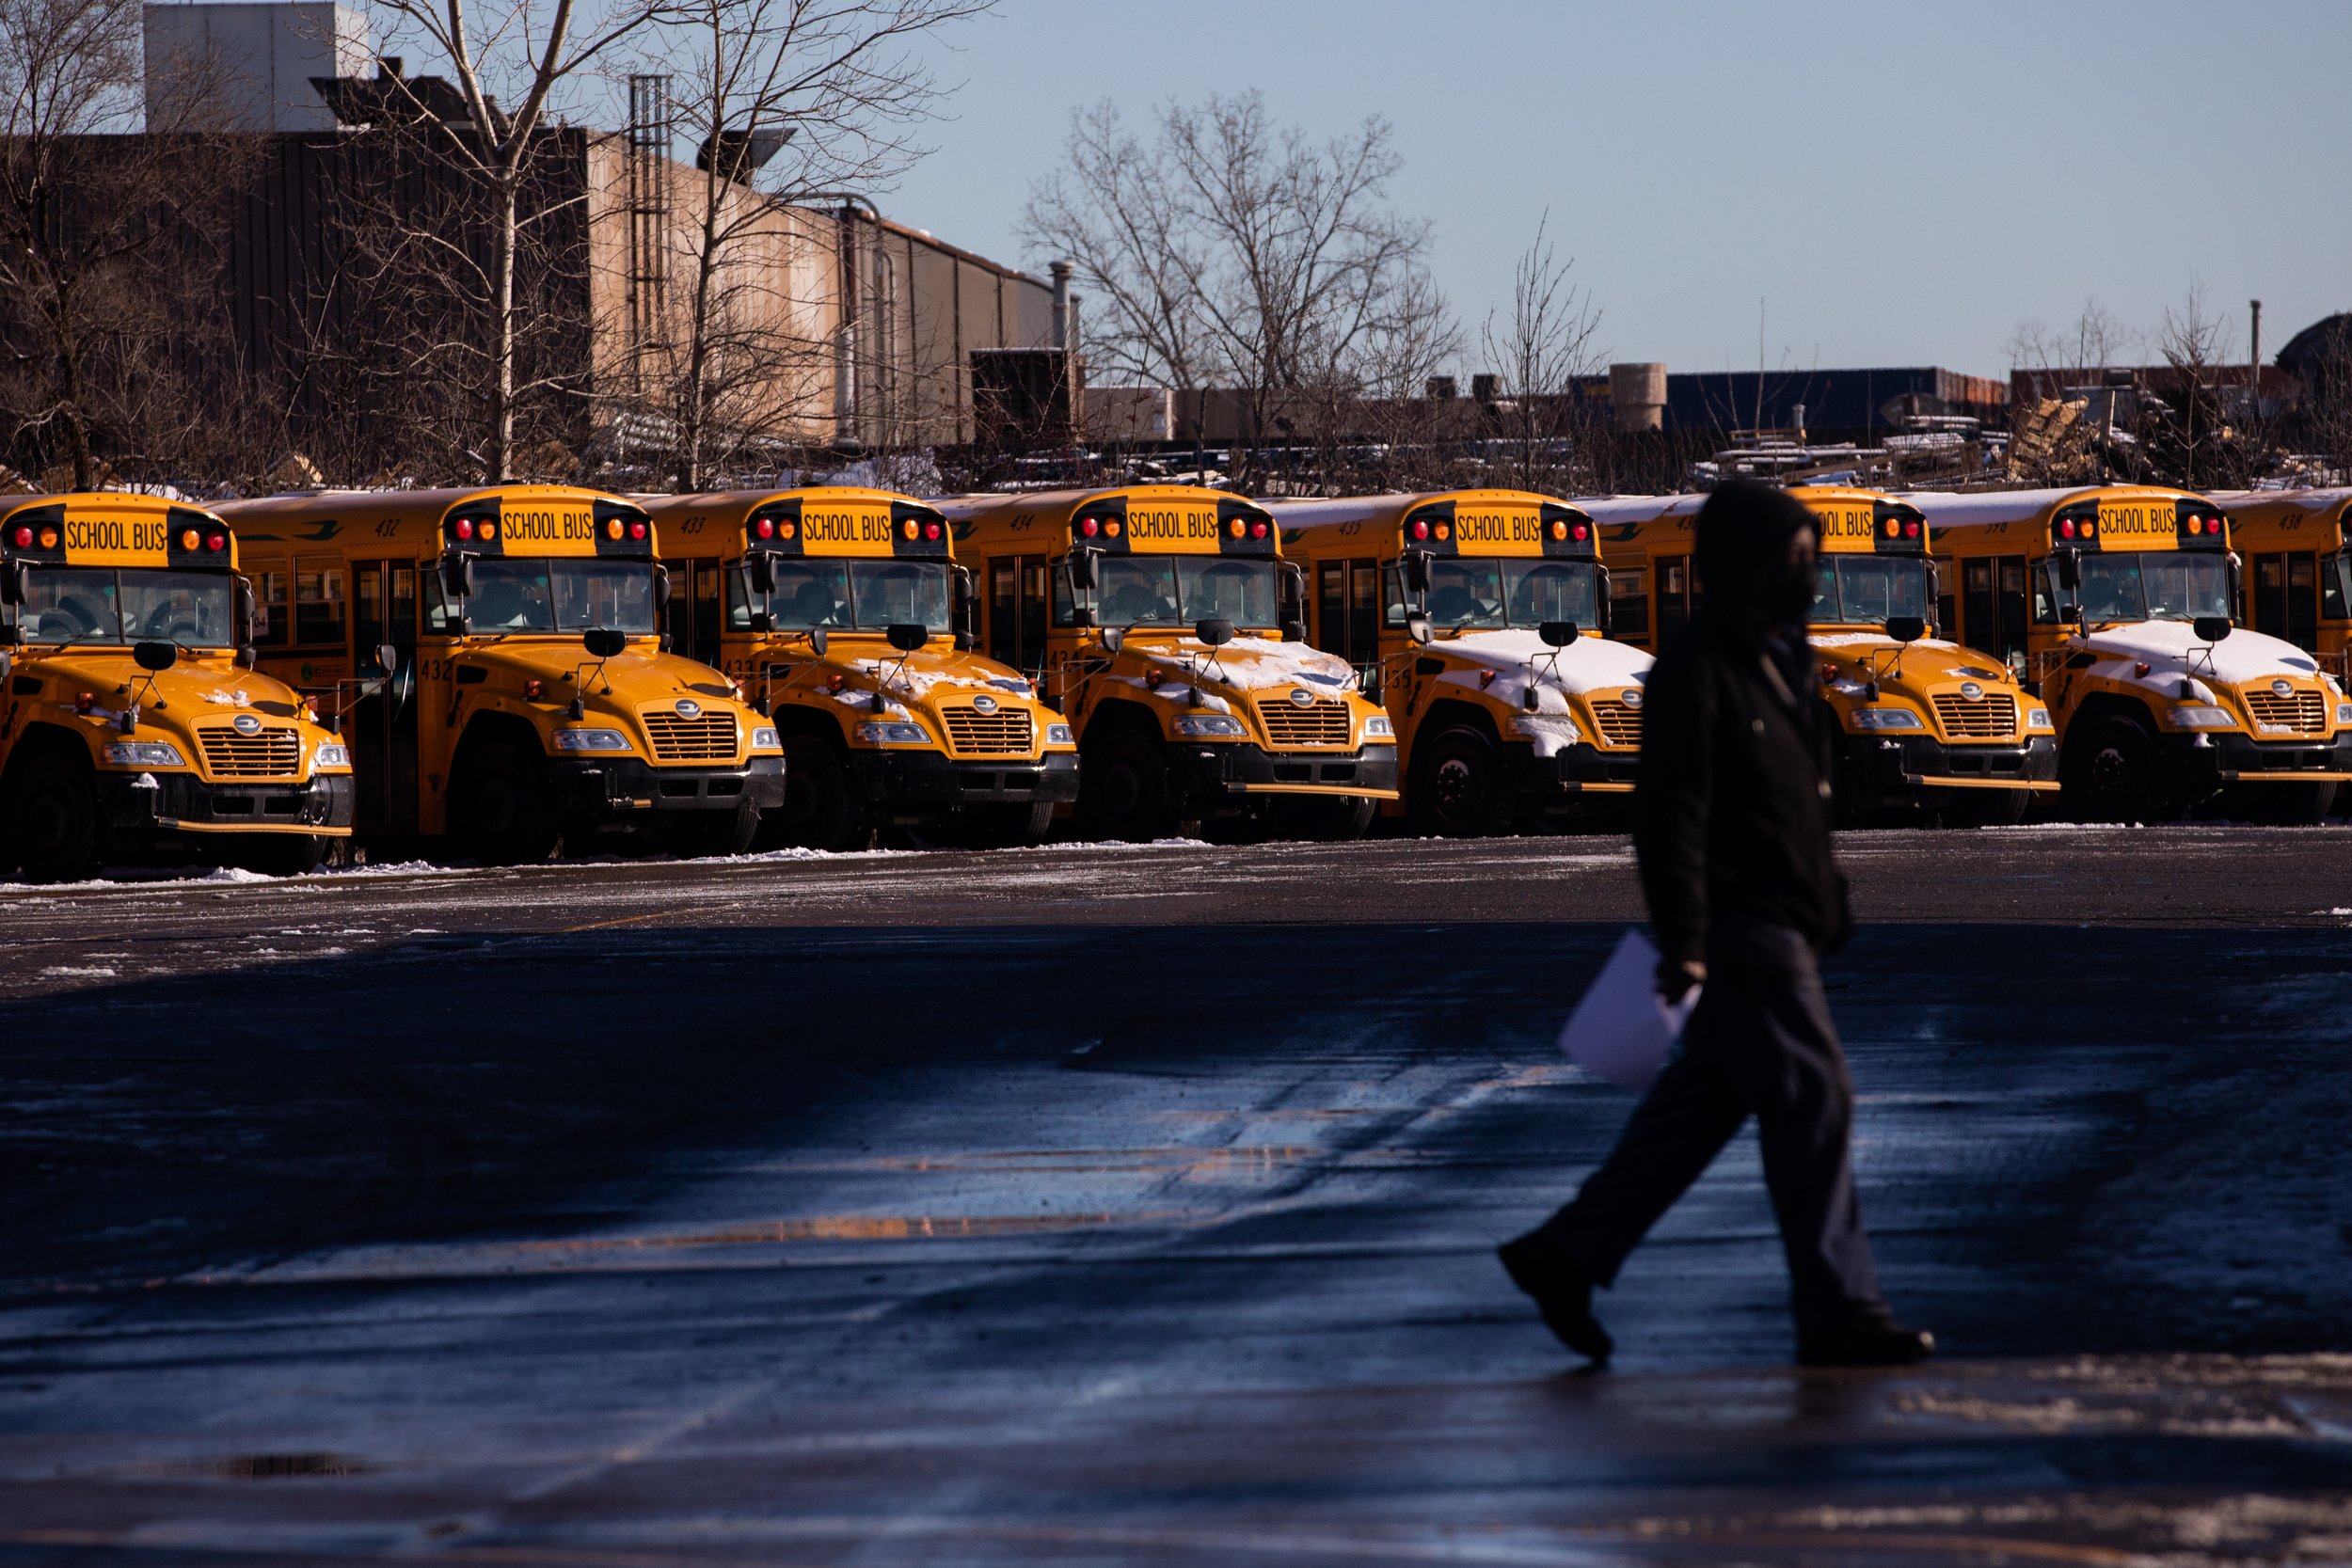  Rows of school buses sit idle in a parking lt at ABC Transportation in Detroit, Michigan, U.S., January 3, 2022.  (Emily Elconin for The New York Times) 